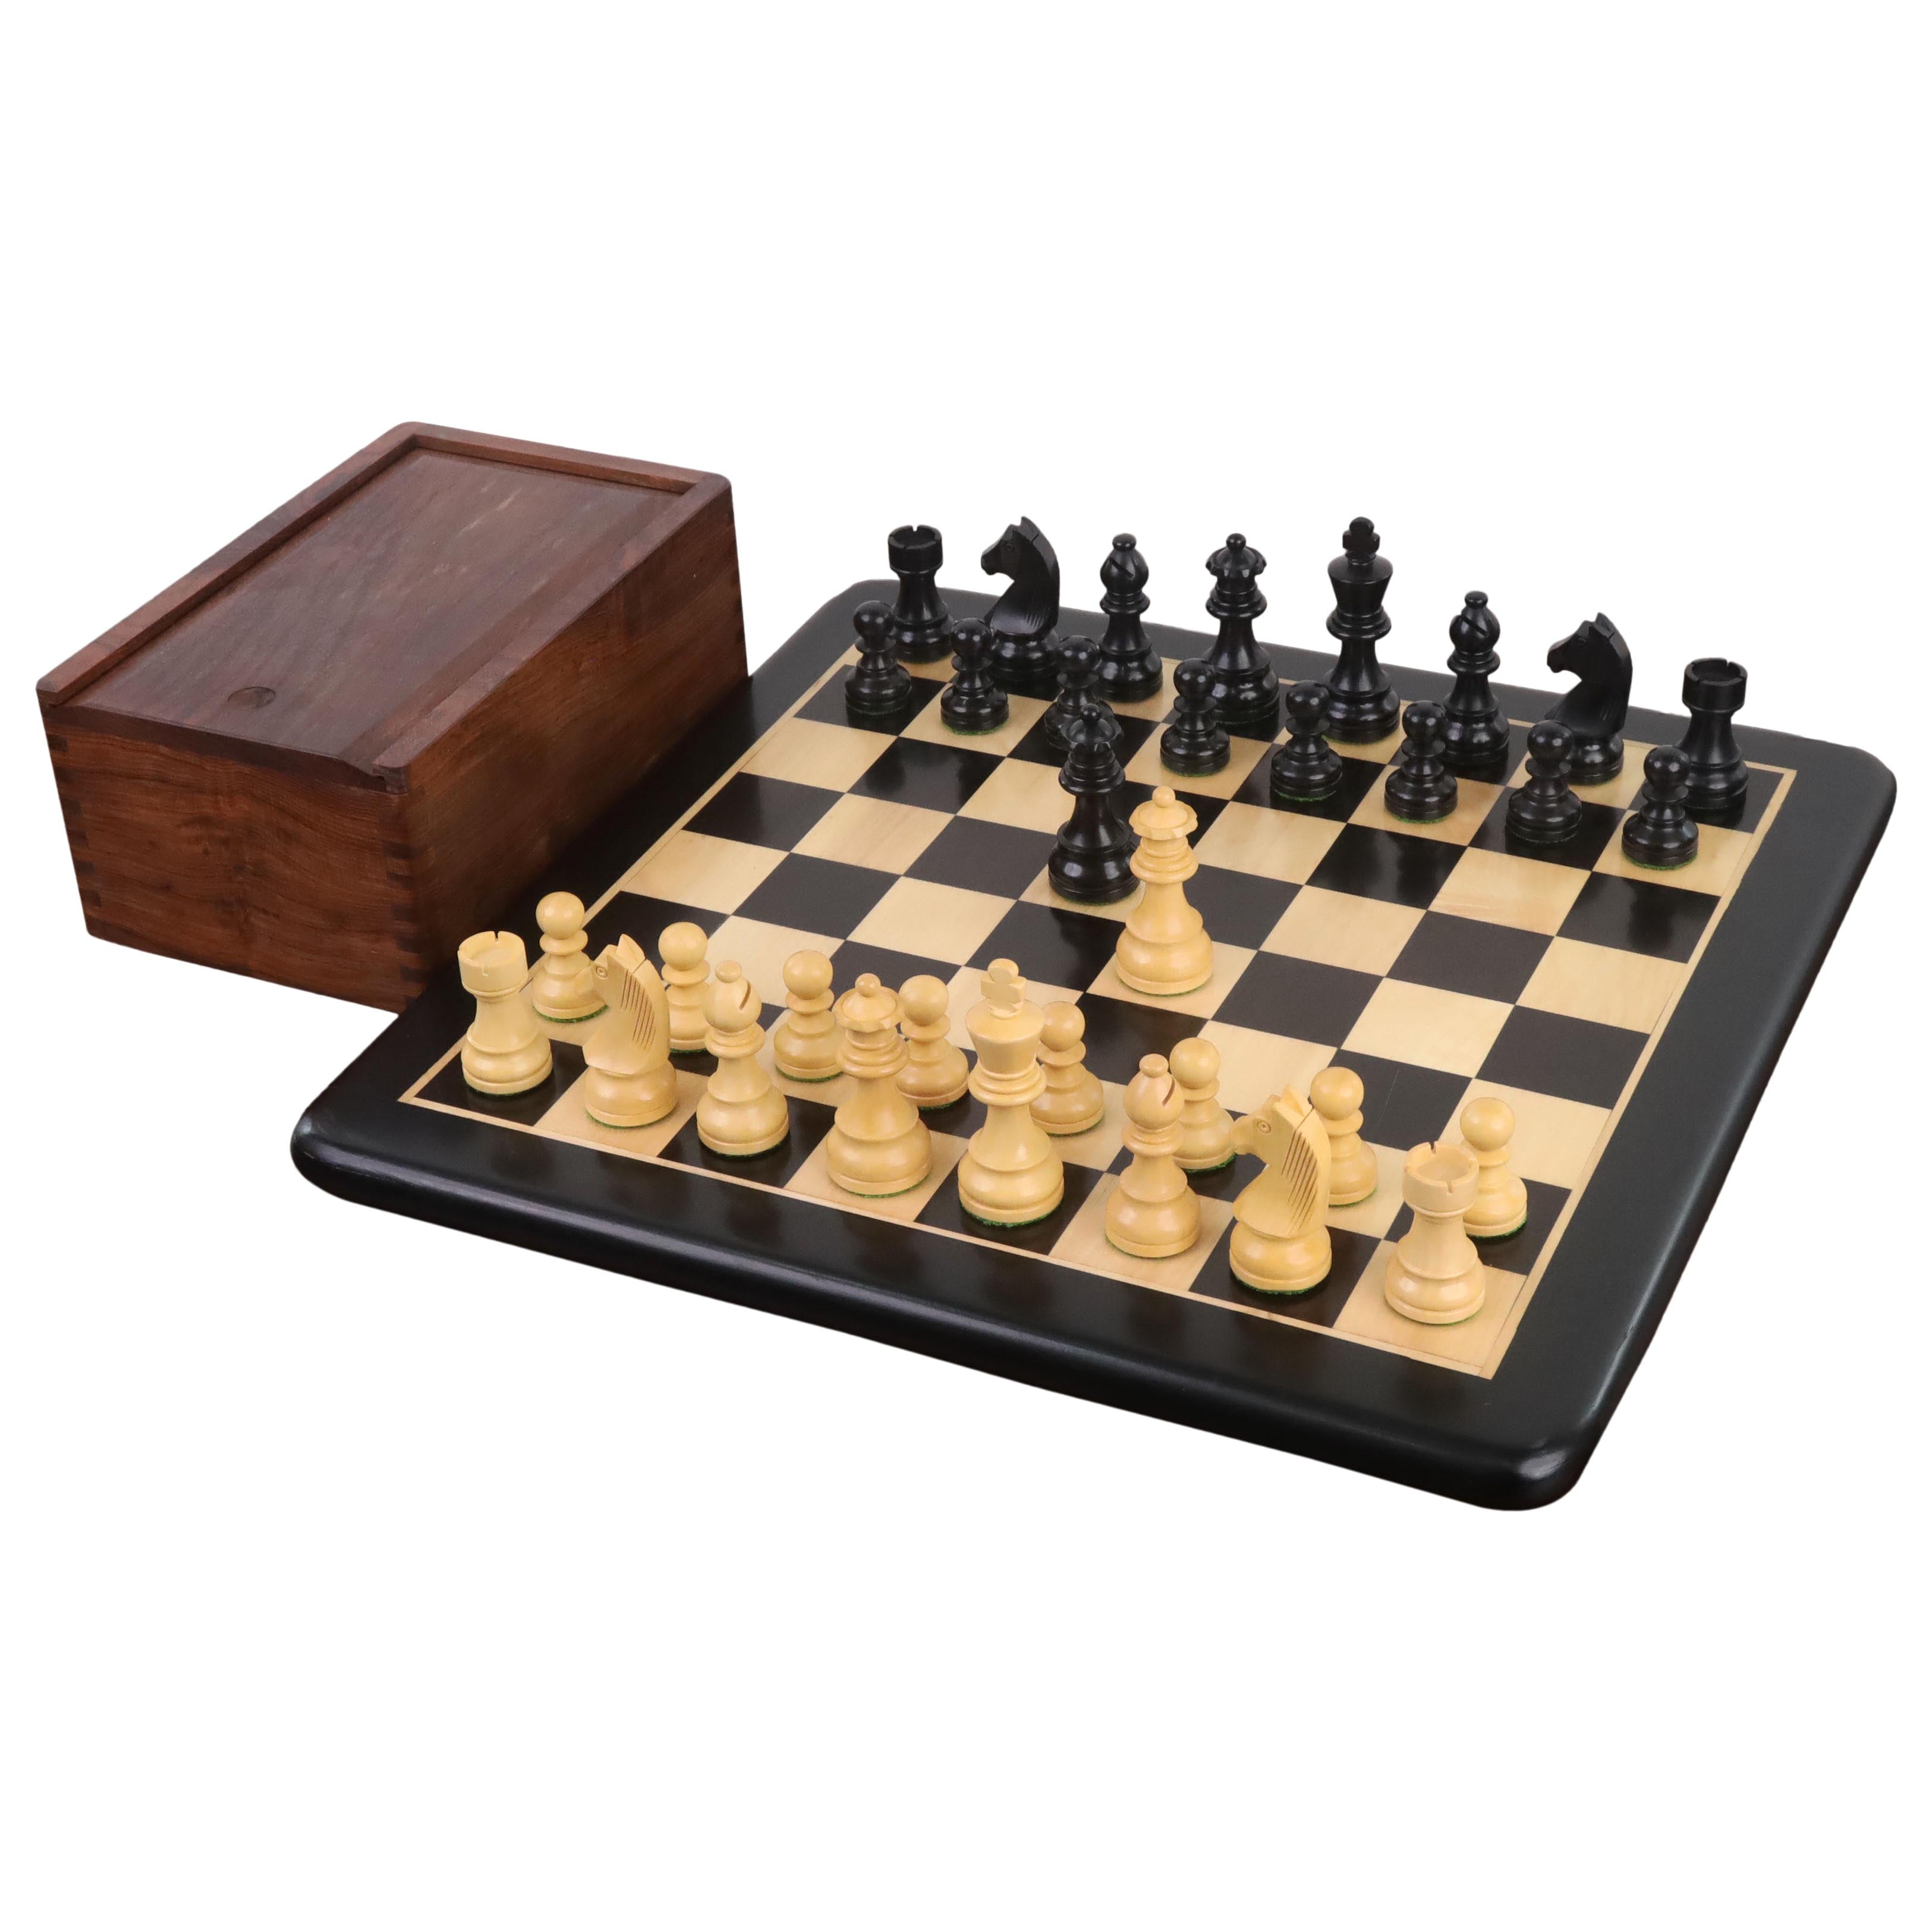 Combo of 3.3" Tournament Staunton Chess Set - Pieces in Ebonised Boxwood with Board and Box